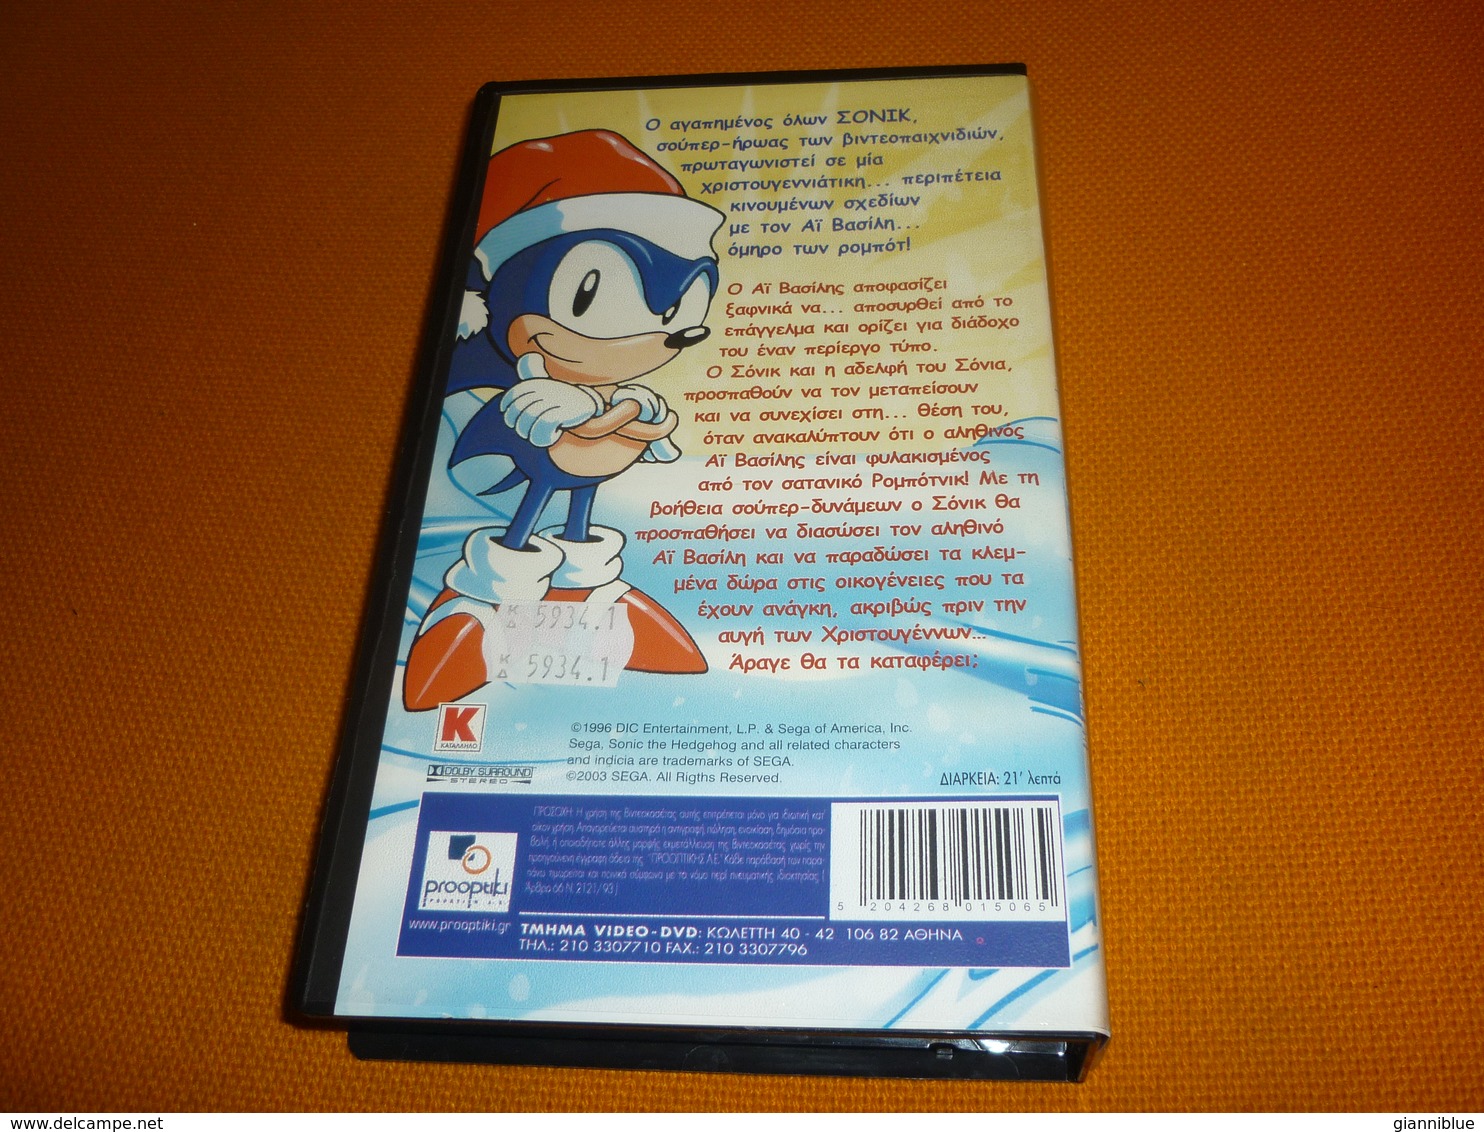 Sonic The Hedgehog Old Greek Vhs Cassette Video Tape From Greece - Animatie